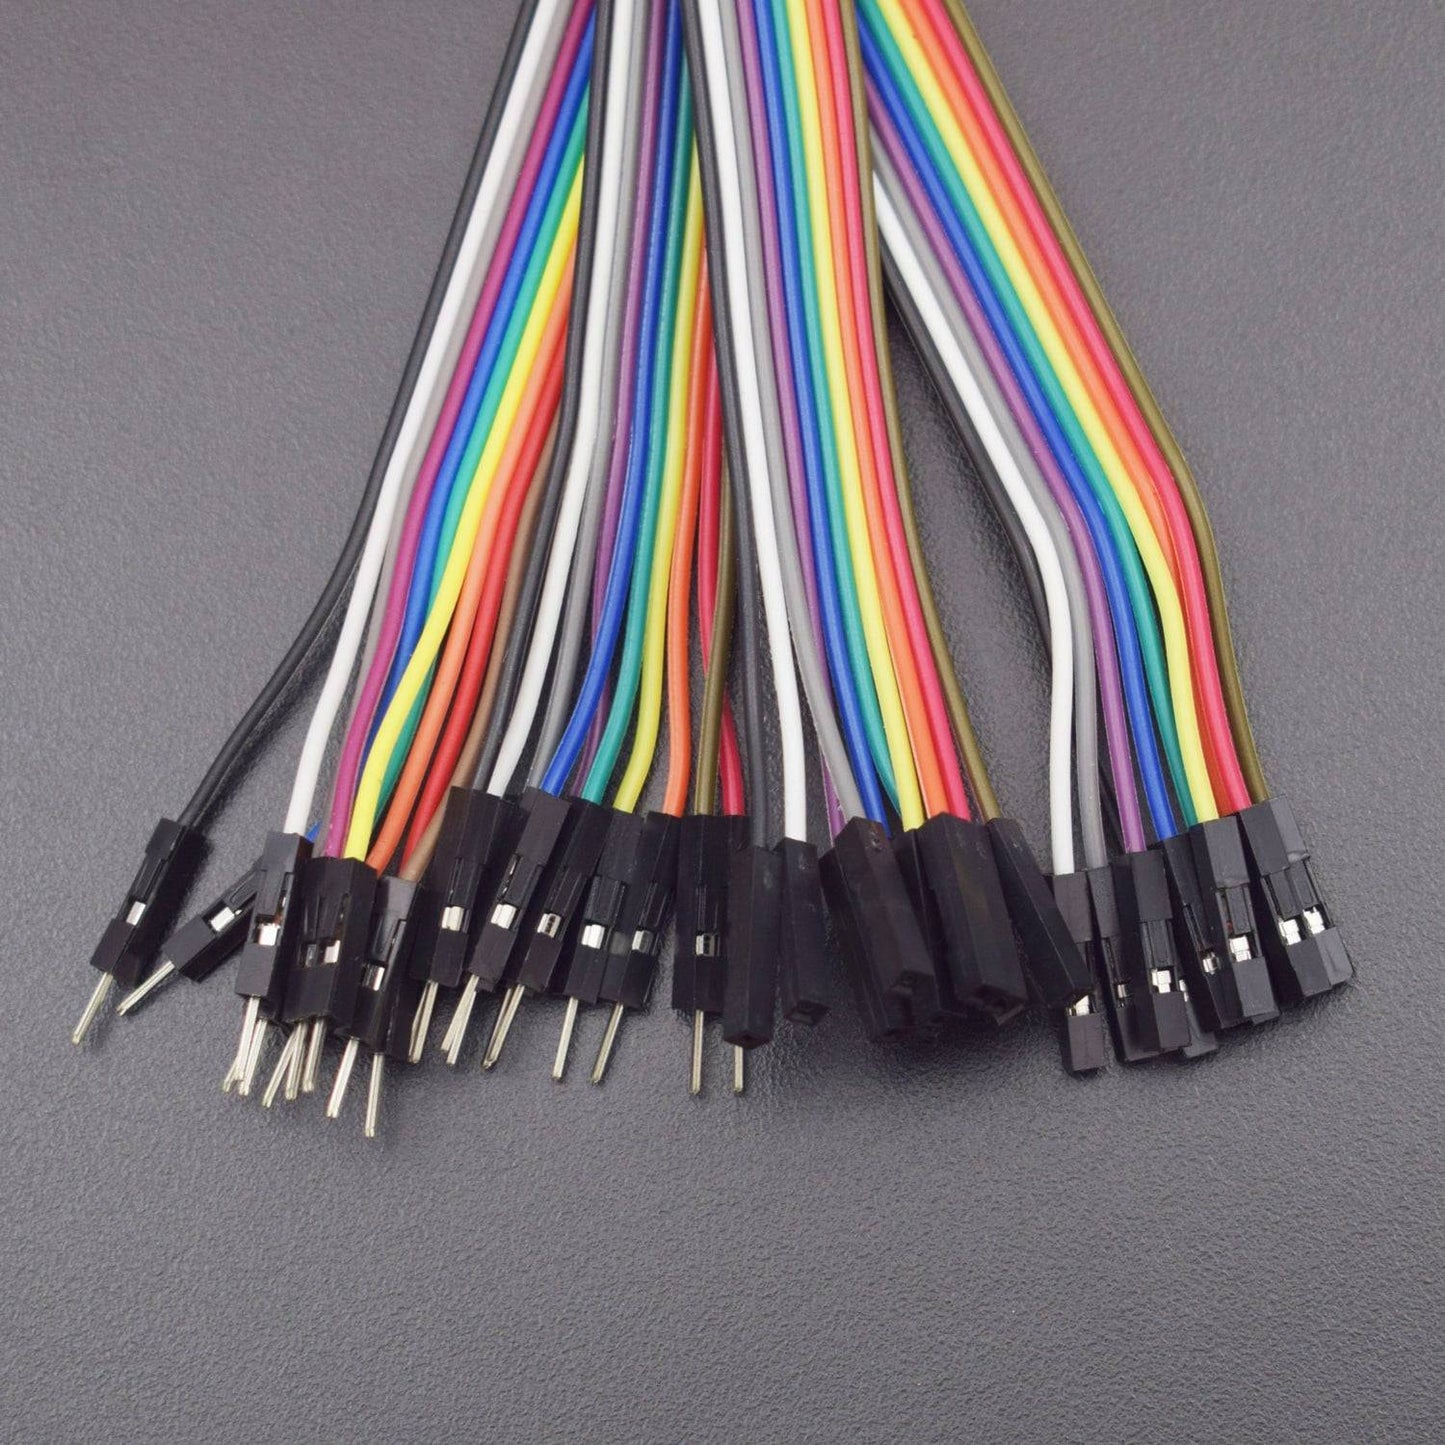 30 Pieces Jumper Wire Set, 10 Male to Male + 10 Female to Female + 10 Male to Female - LD994 - REES52